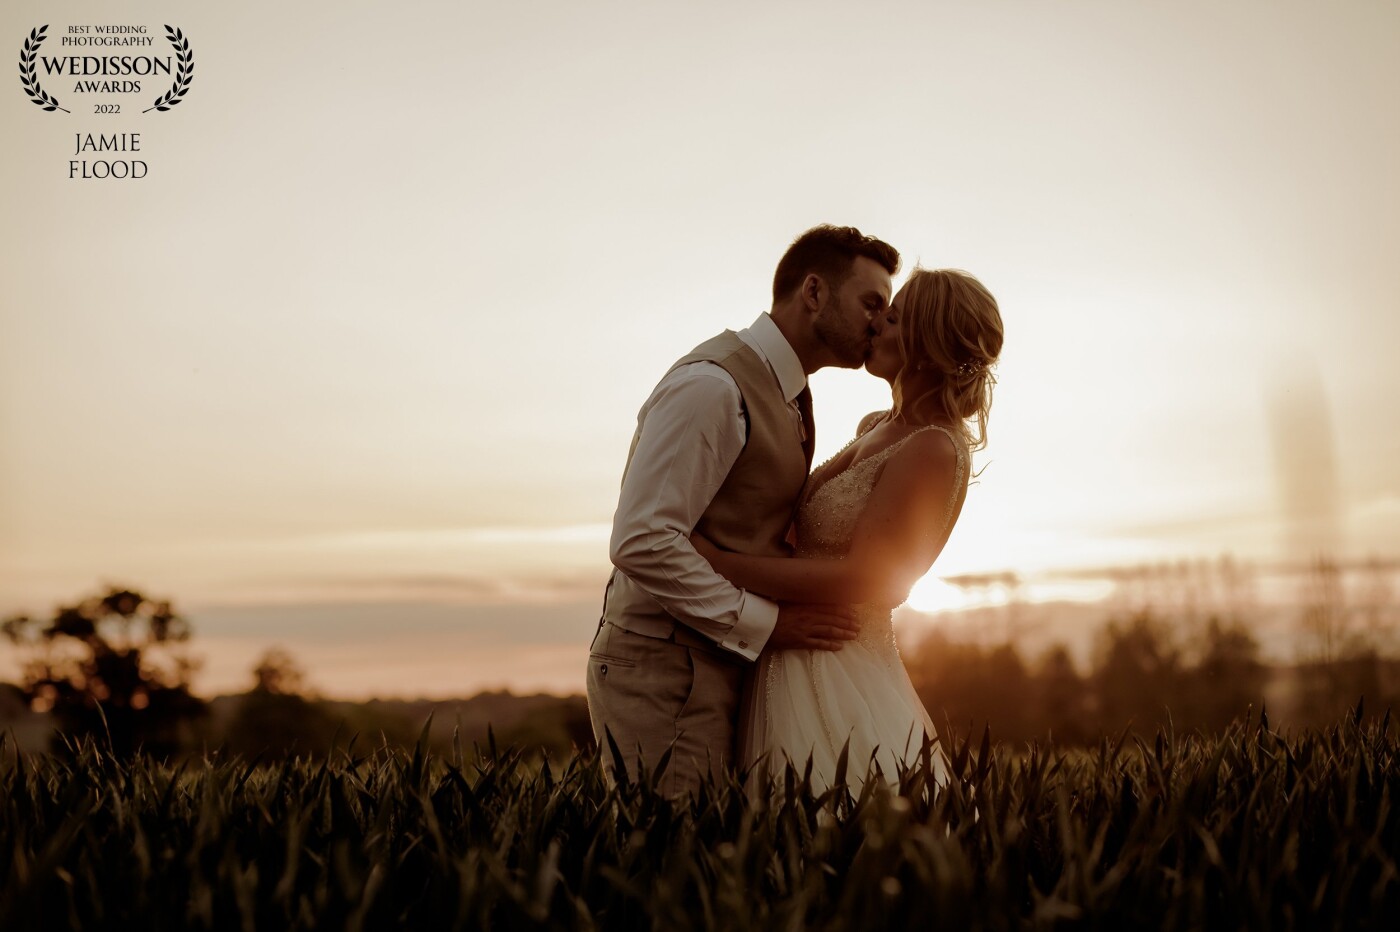 Sunset lovers, what more could you ask for as a wedding photographer! shot at my absolute fave location for uk sunsets, Farnham.